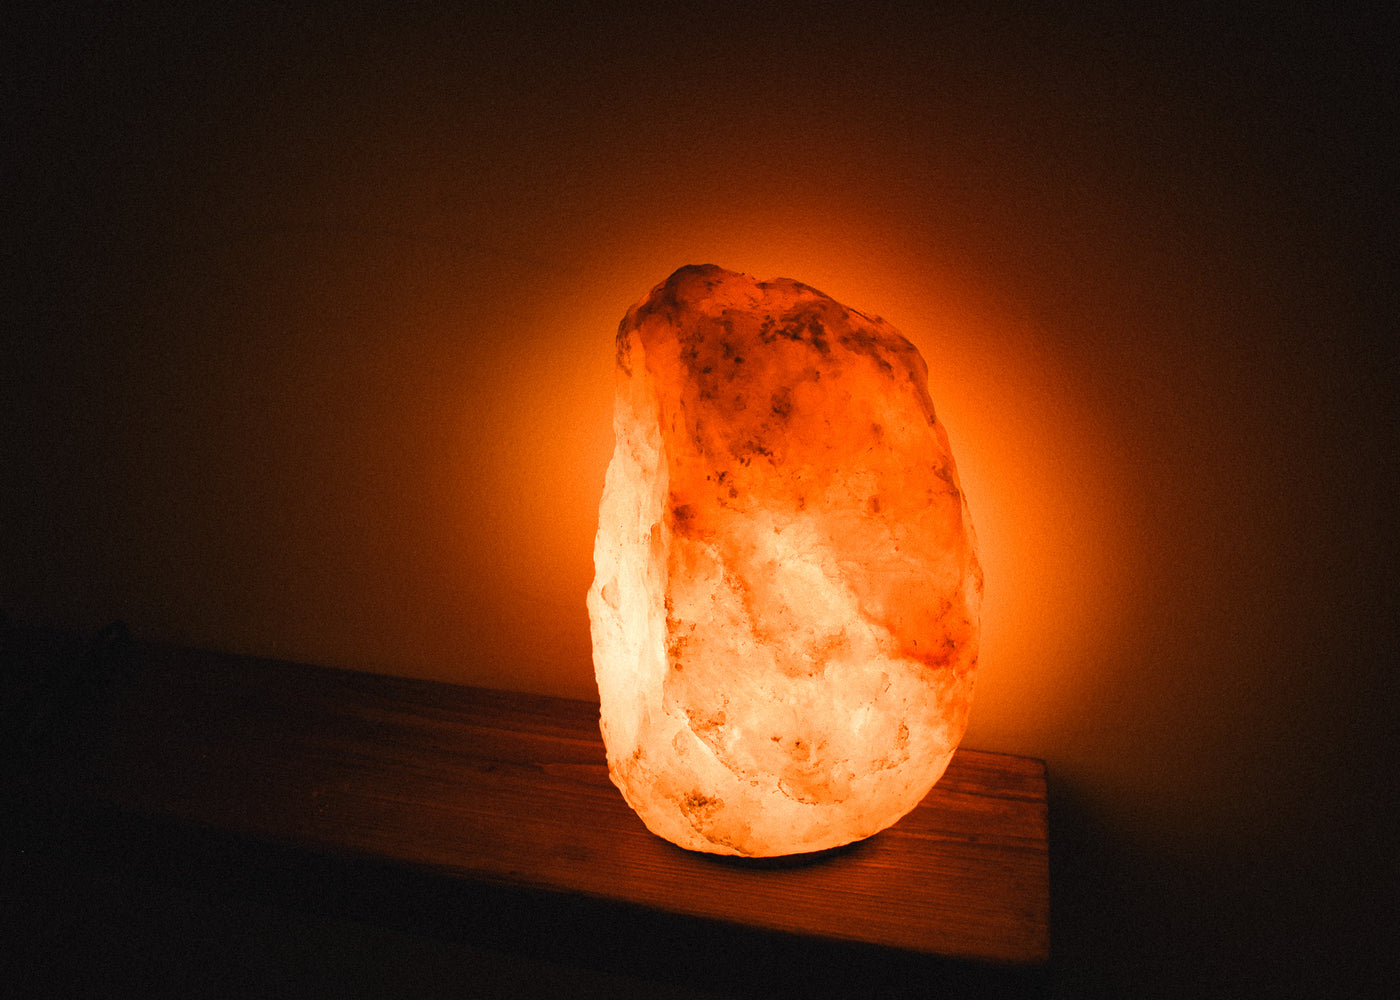 Himalayan Salt lamp with wooden base and plug in